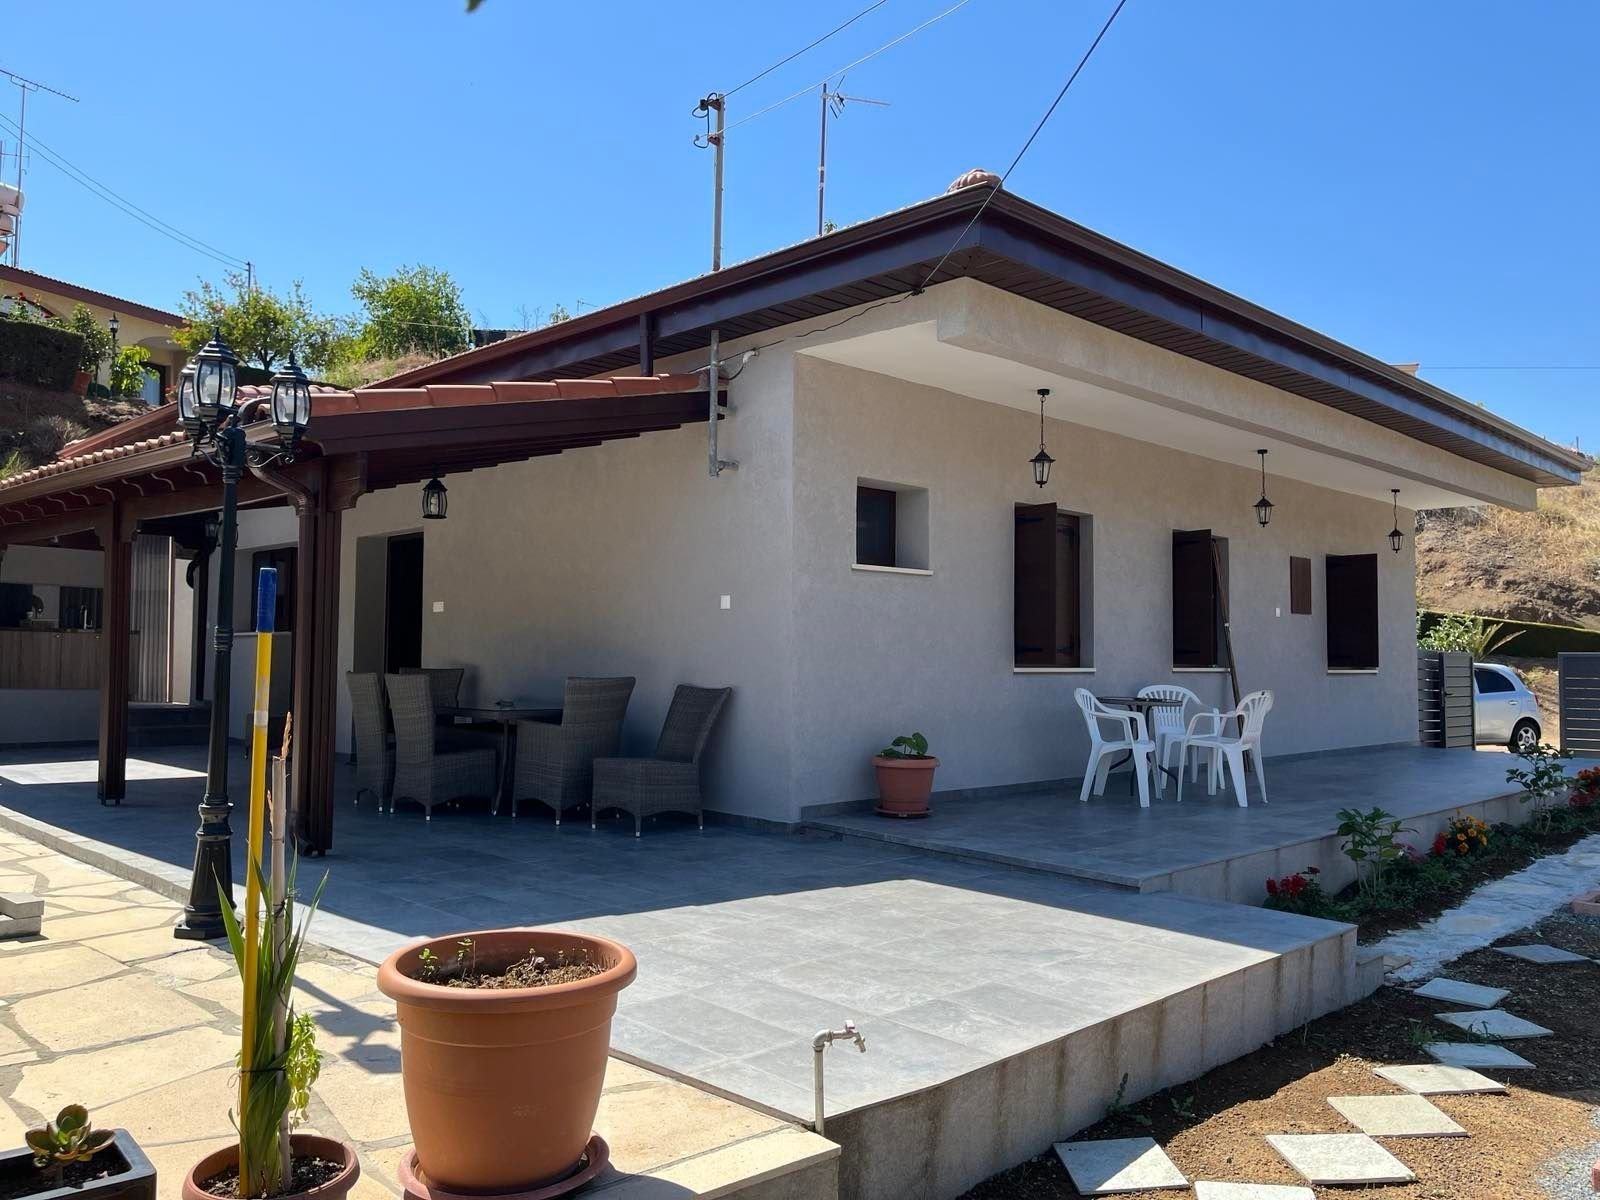 3 Bedroom House for Sale in Kalo Chorio Lemesou, Limassol District